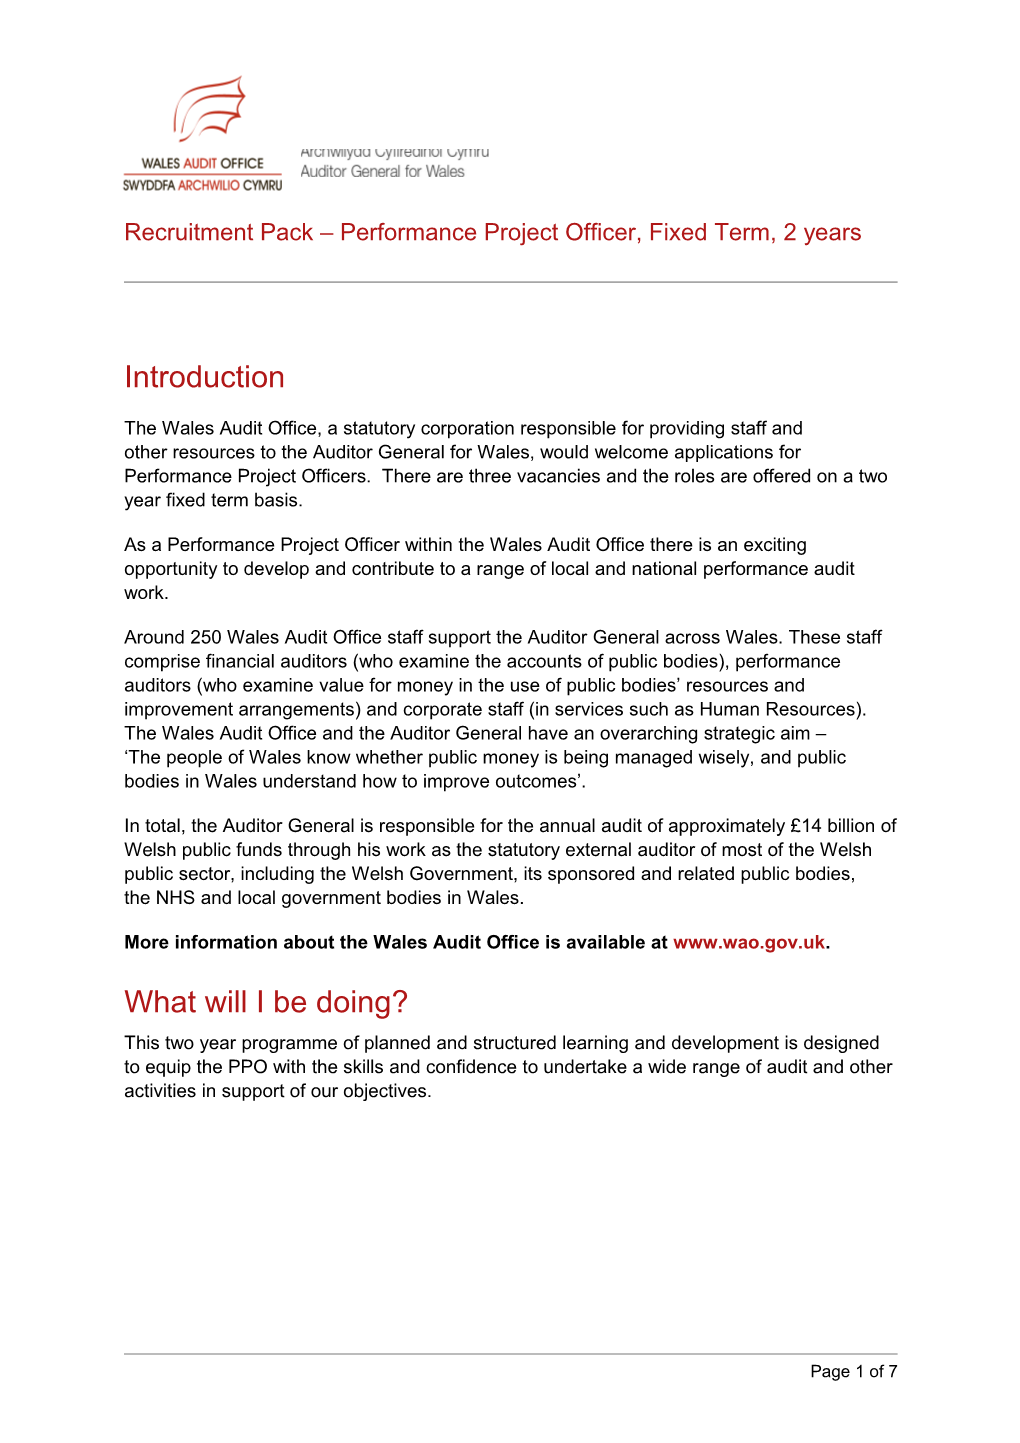 Recruitment Pack Performance Project Officer, Fixed Term